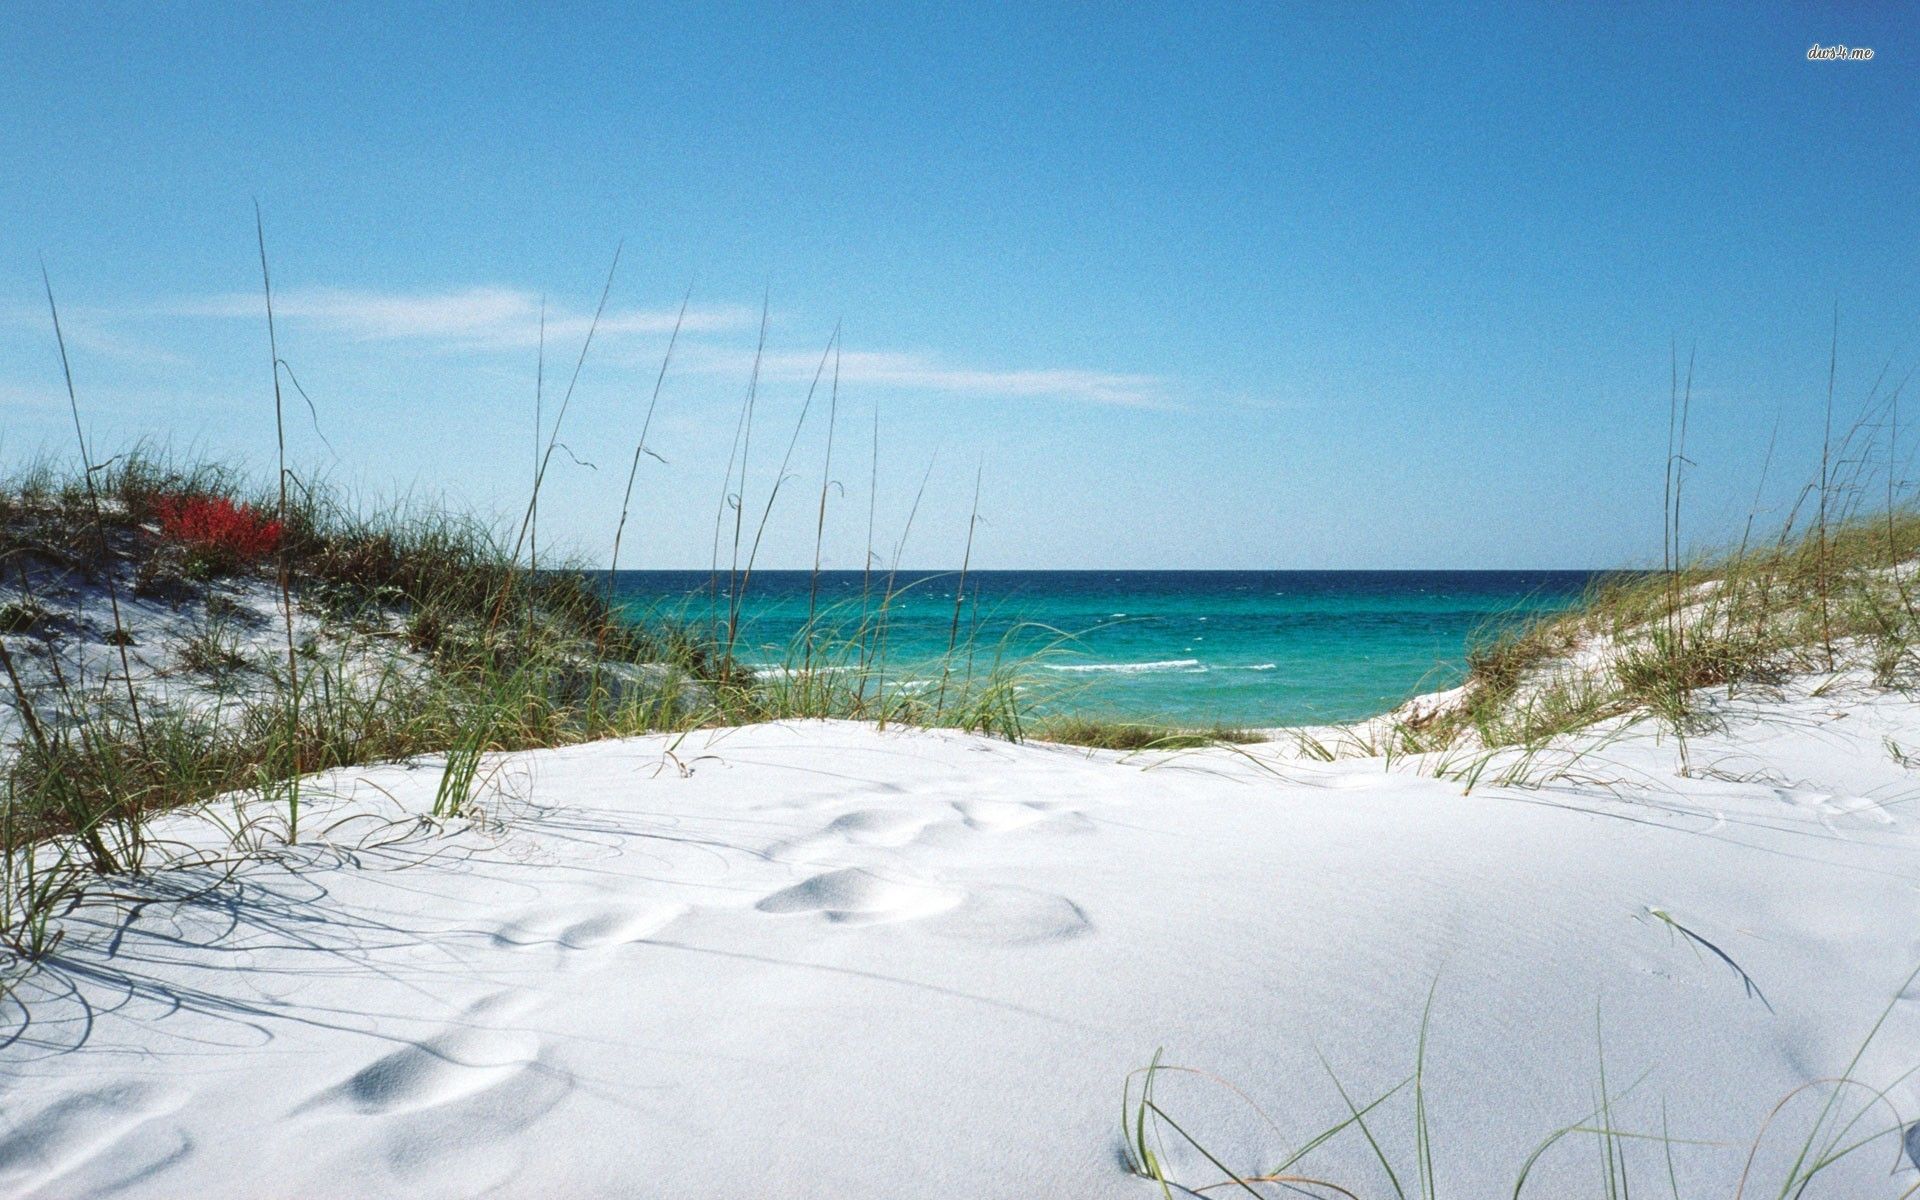 White sanded beach in Florida wallpaper - Beach wallpapers - #20723